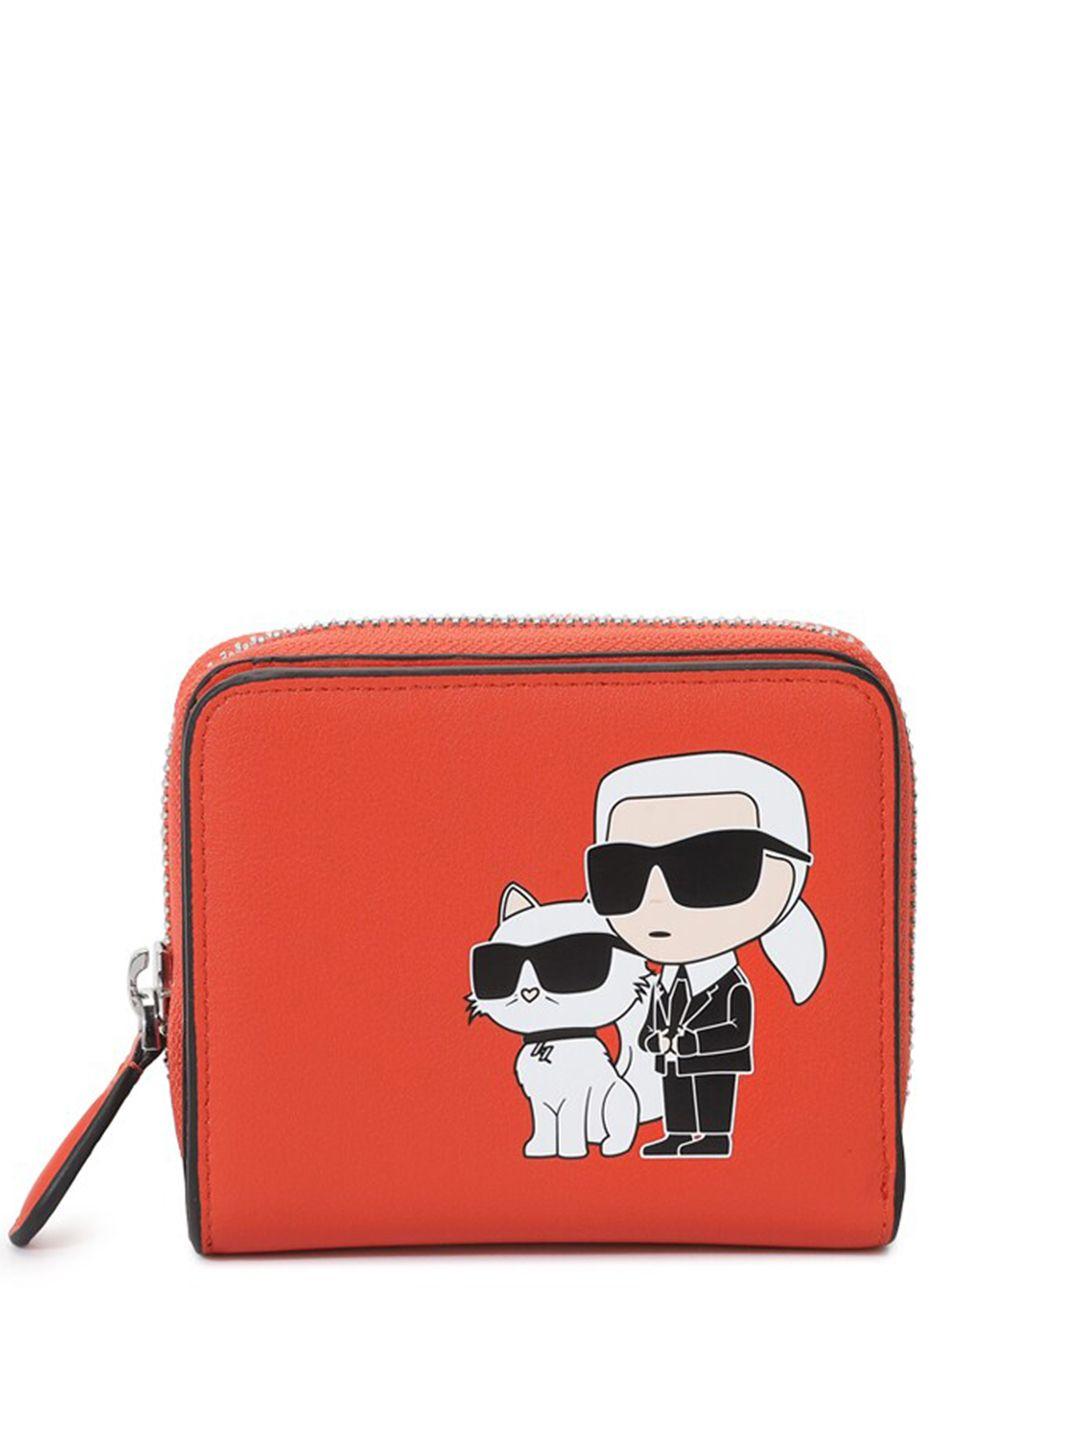 karl lagerfeld women graphic printed leather two fold wallet